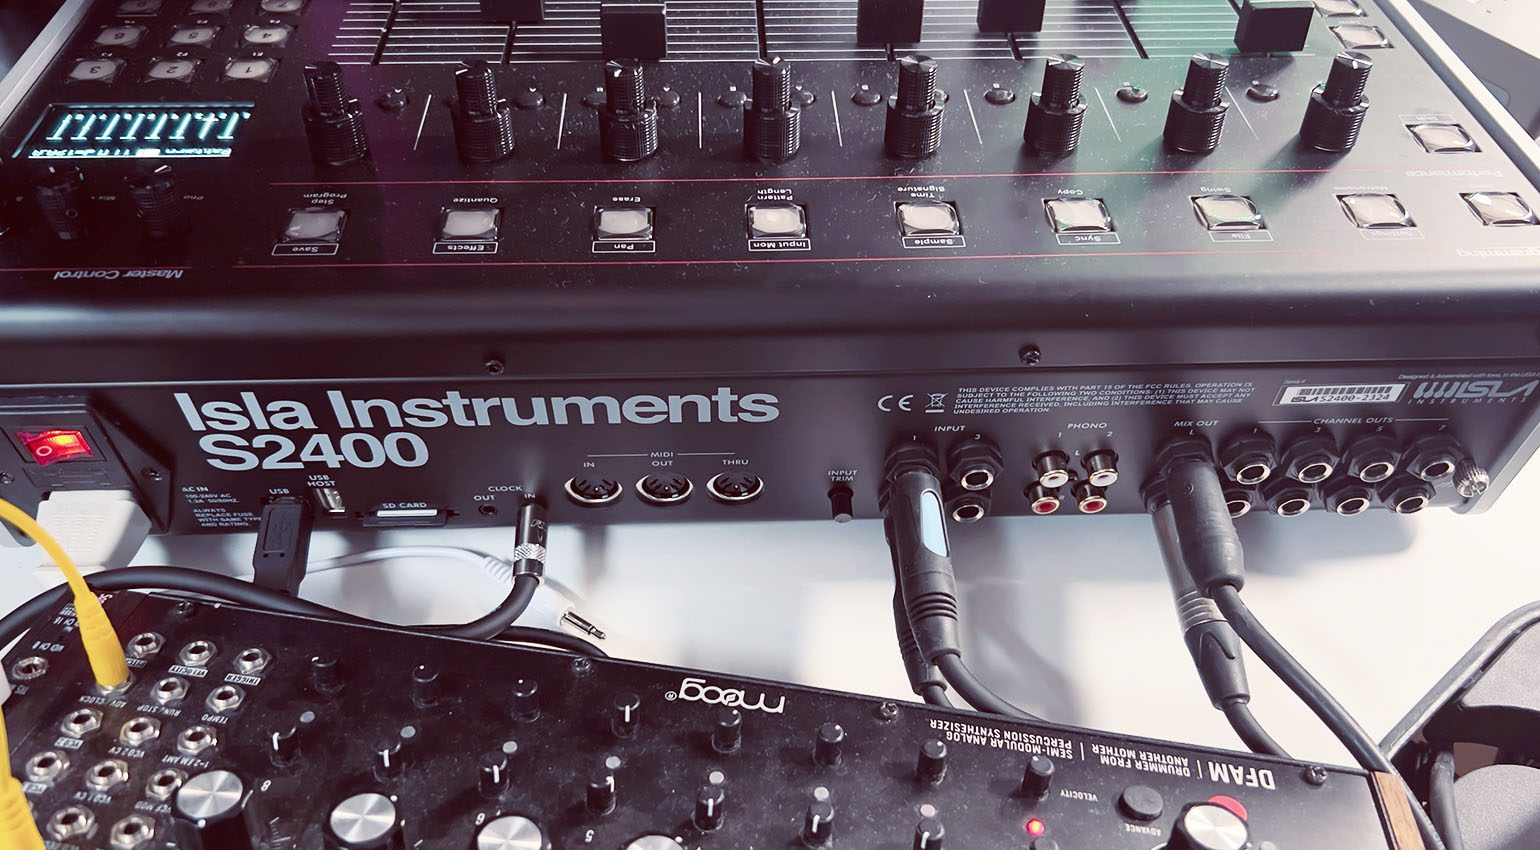 Isla Instruments S2400 outputs